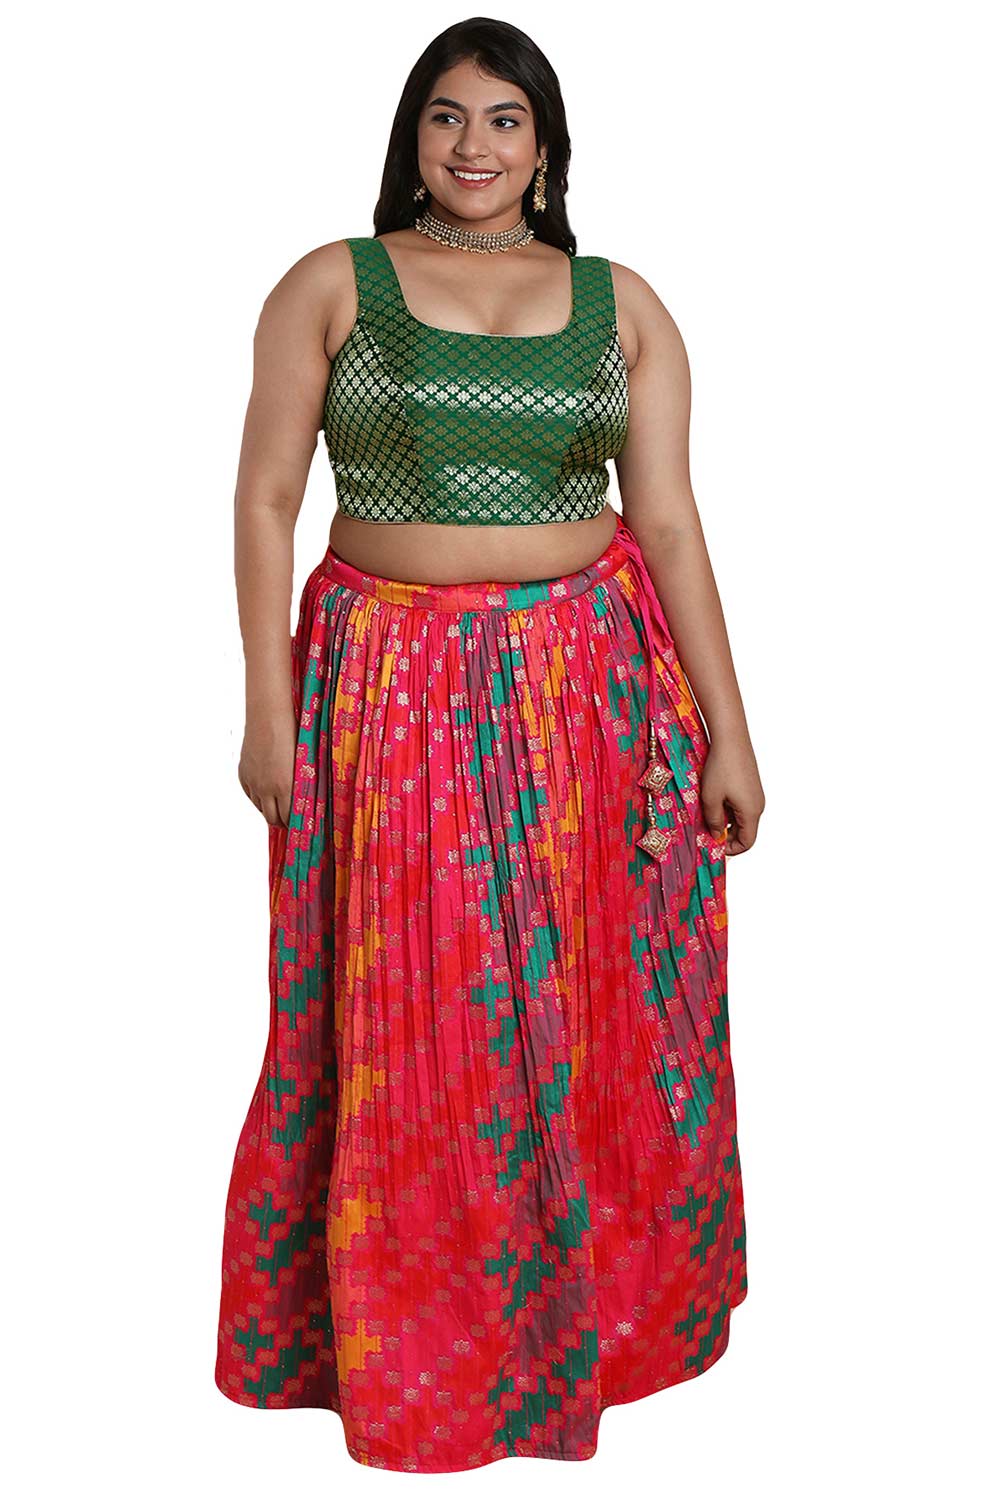 Buy Green Brocade Readymade Saree Blouse Online - One Minute Sareee